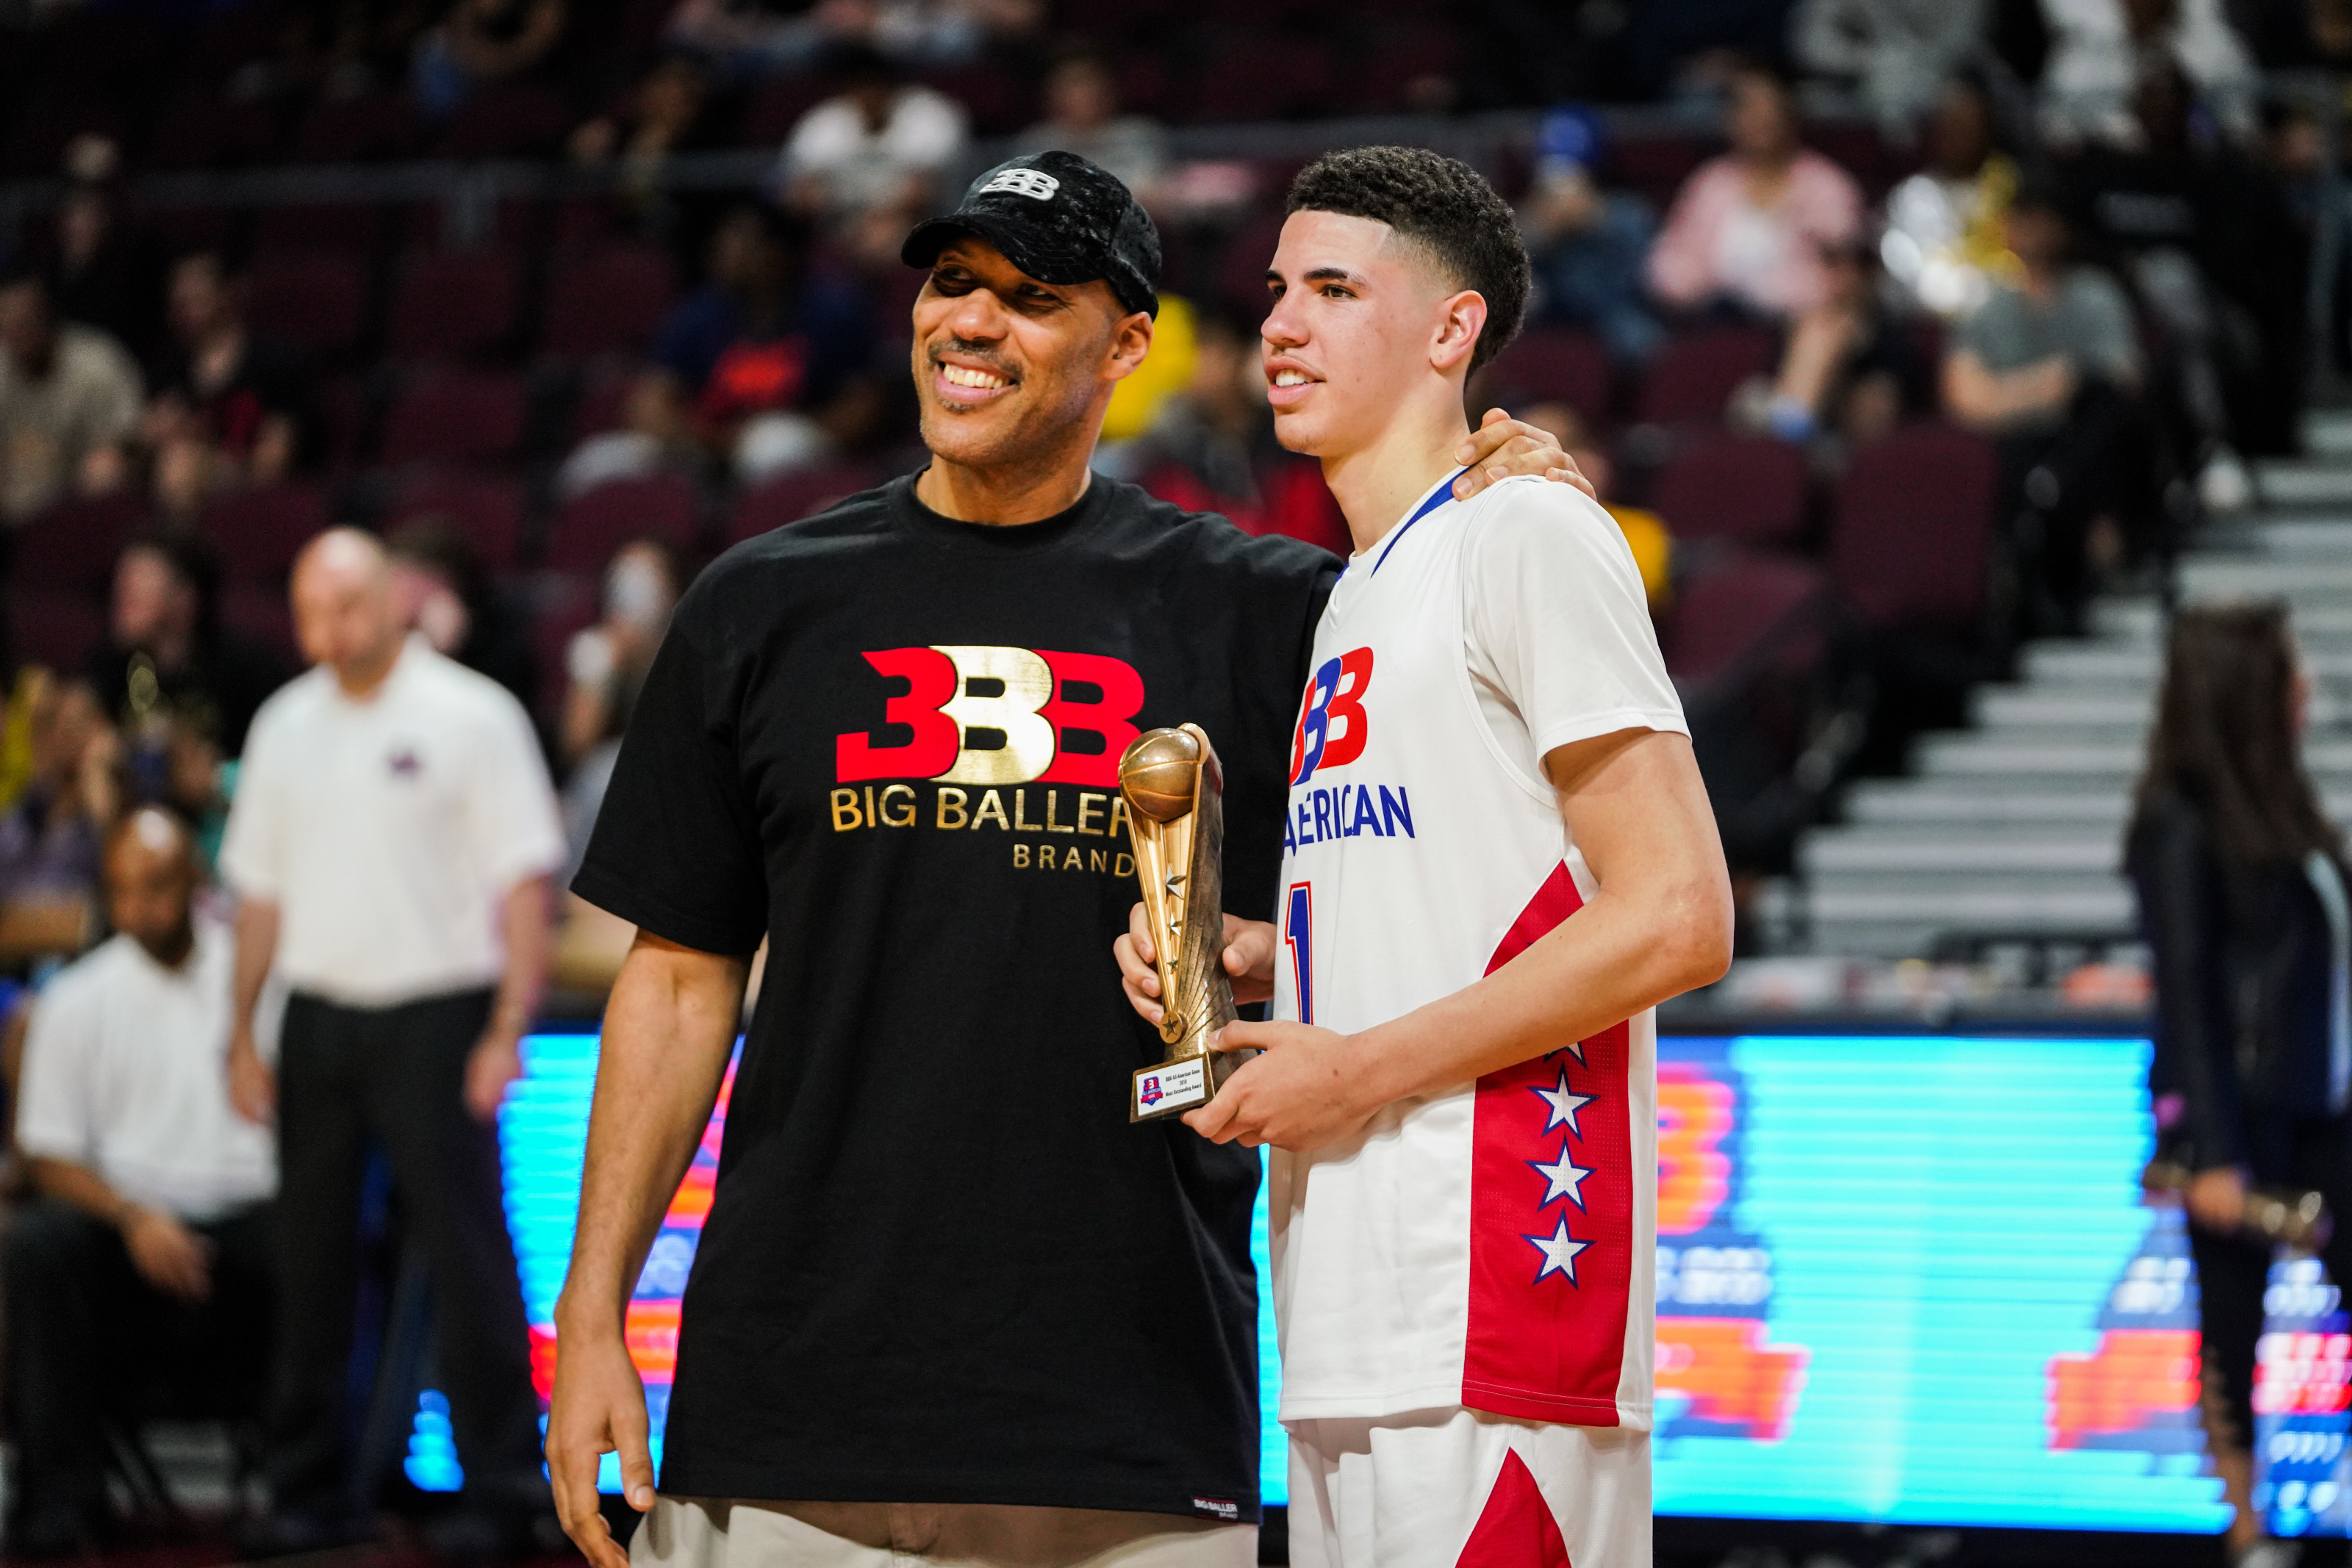 Who is Lonzo Ball's dad, LaVar Ball?